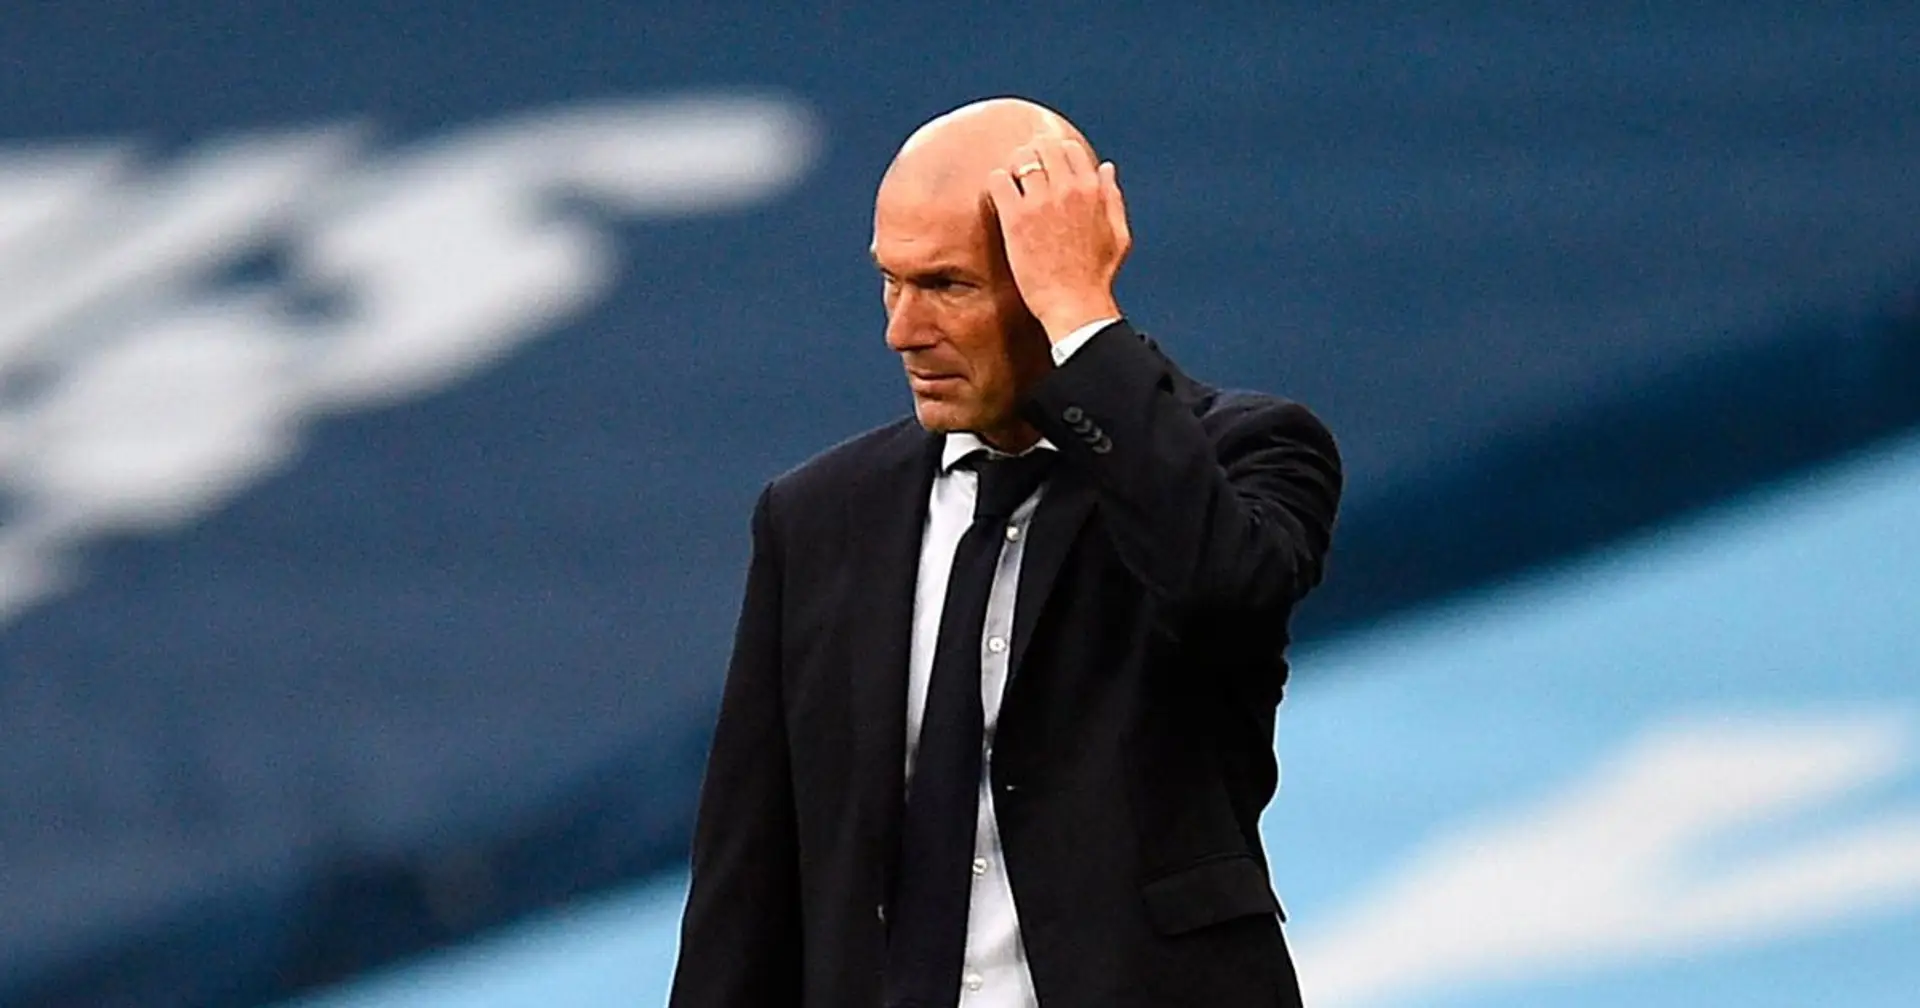 Real Madrid won't sack Zidane in midseason but there's 'total loss of confidence' in Frenchman in the dressing room: Marca (reliability: 5 stars)